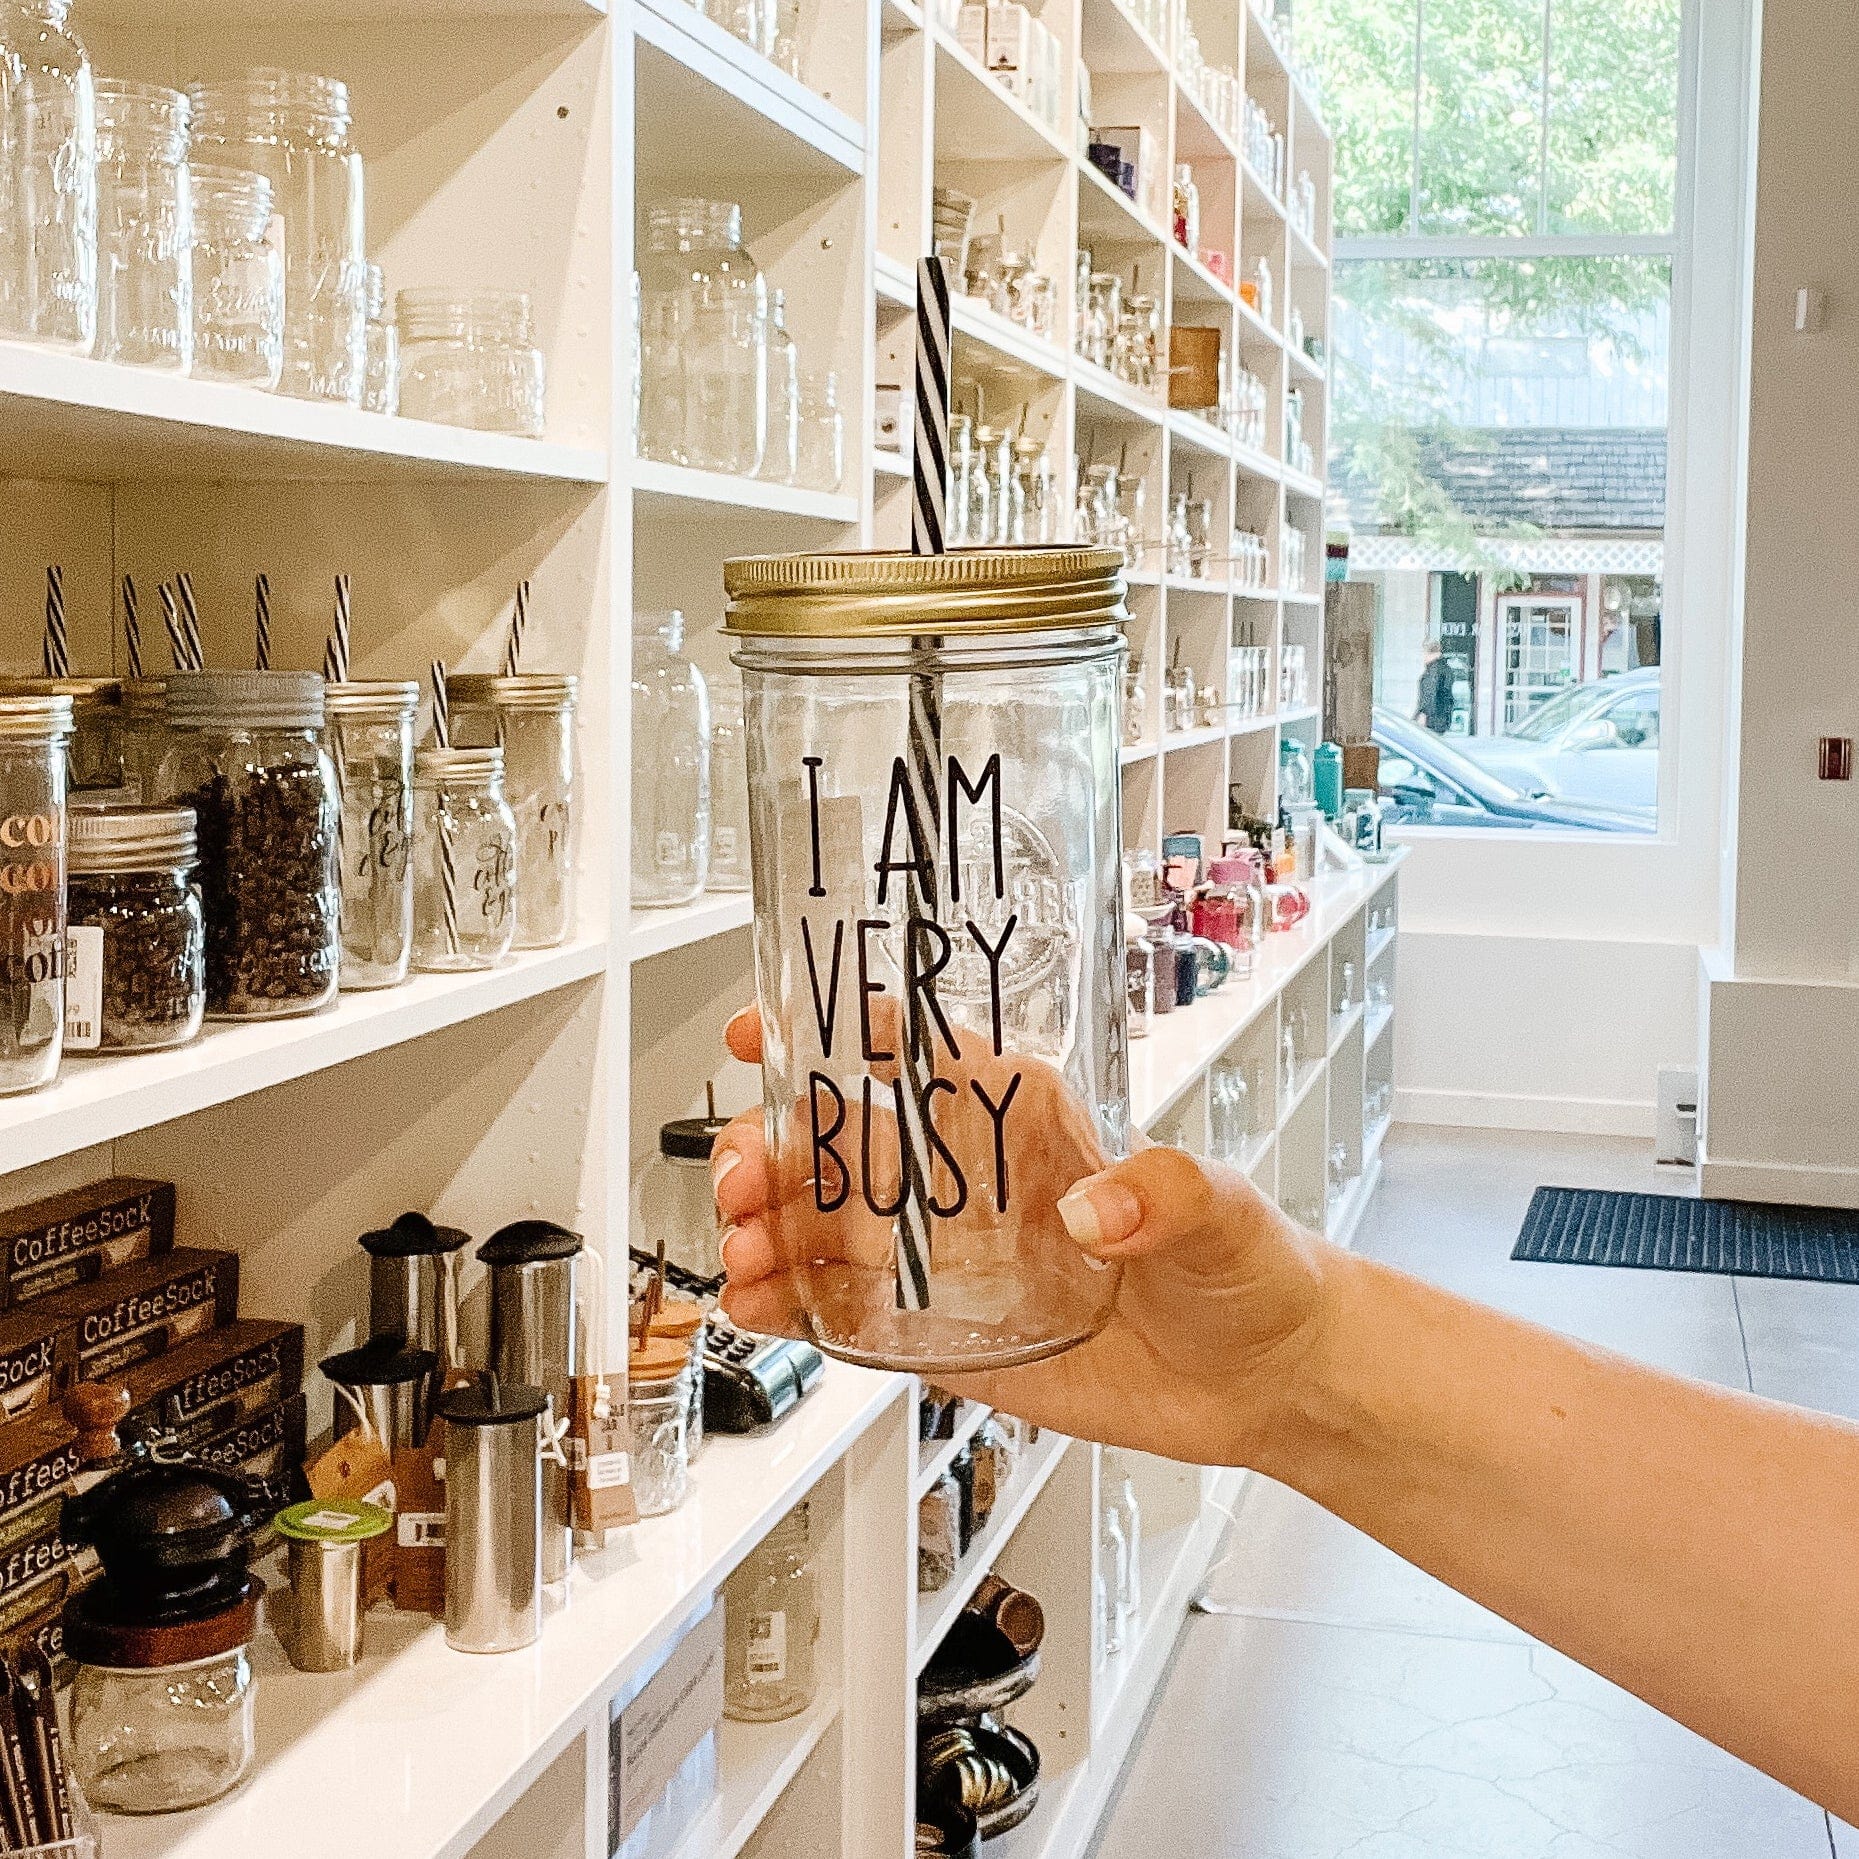 Photo of a mason jar tumblr with a 'I am very busy' sticker on it